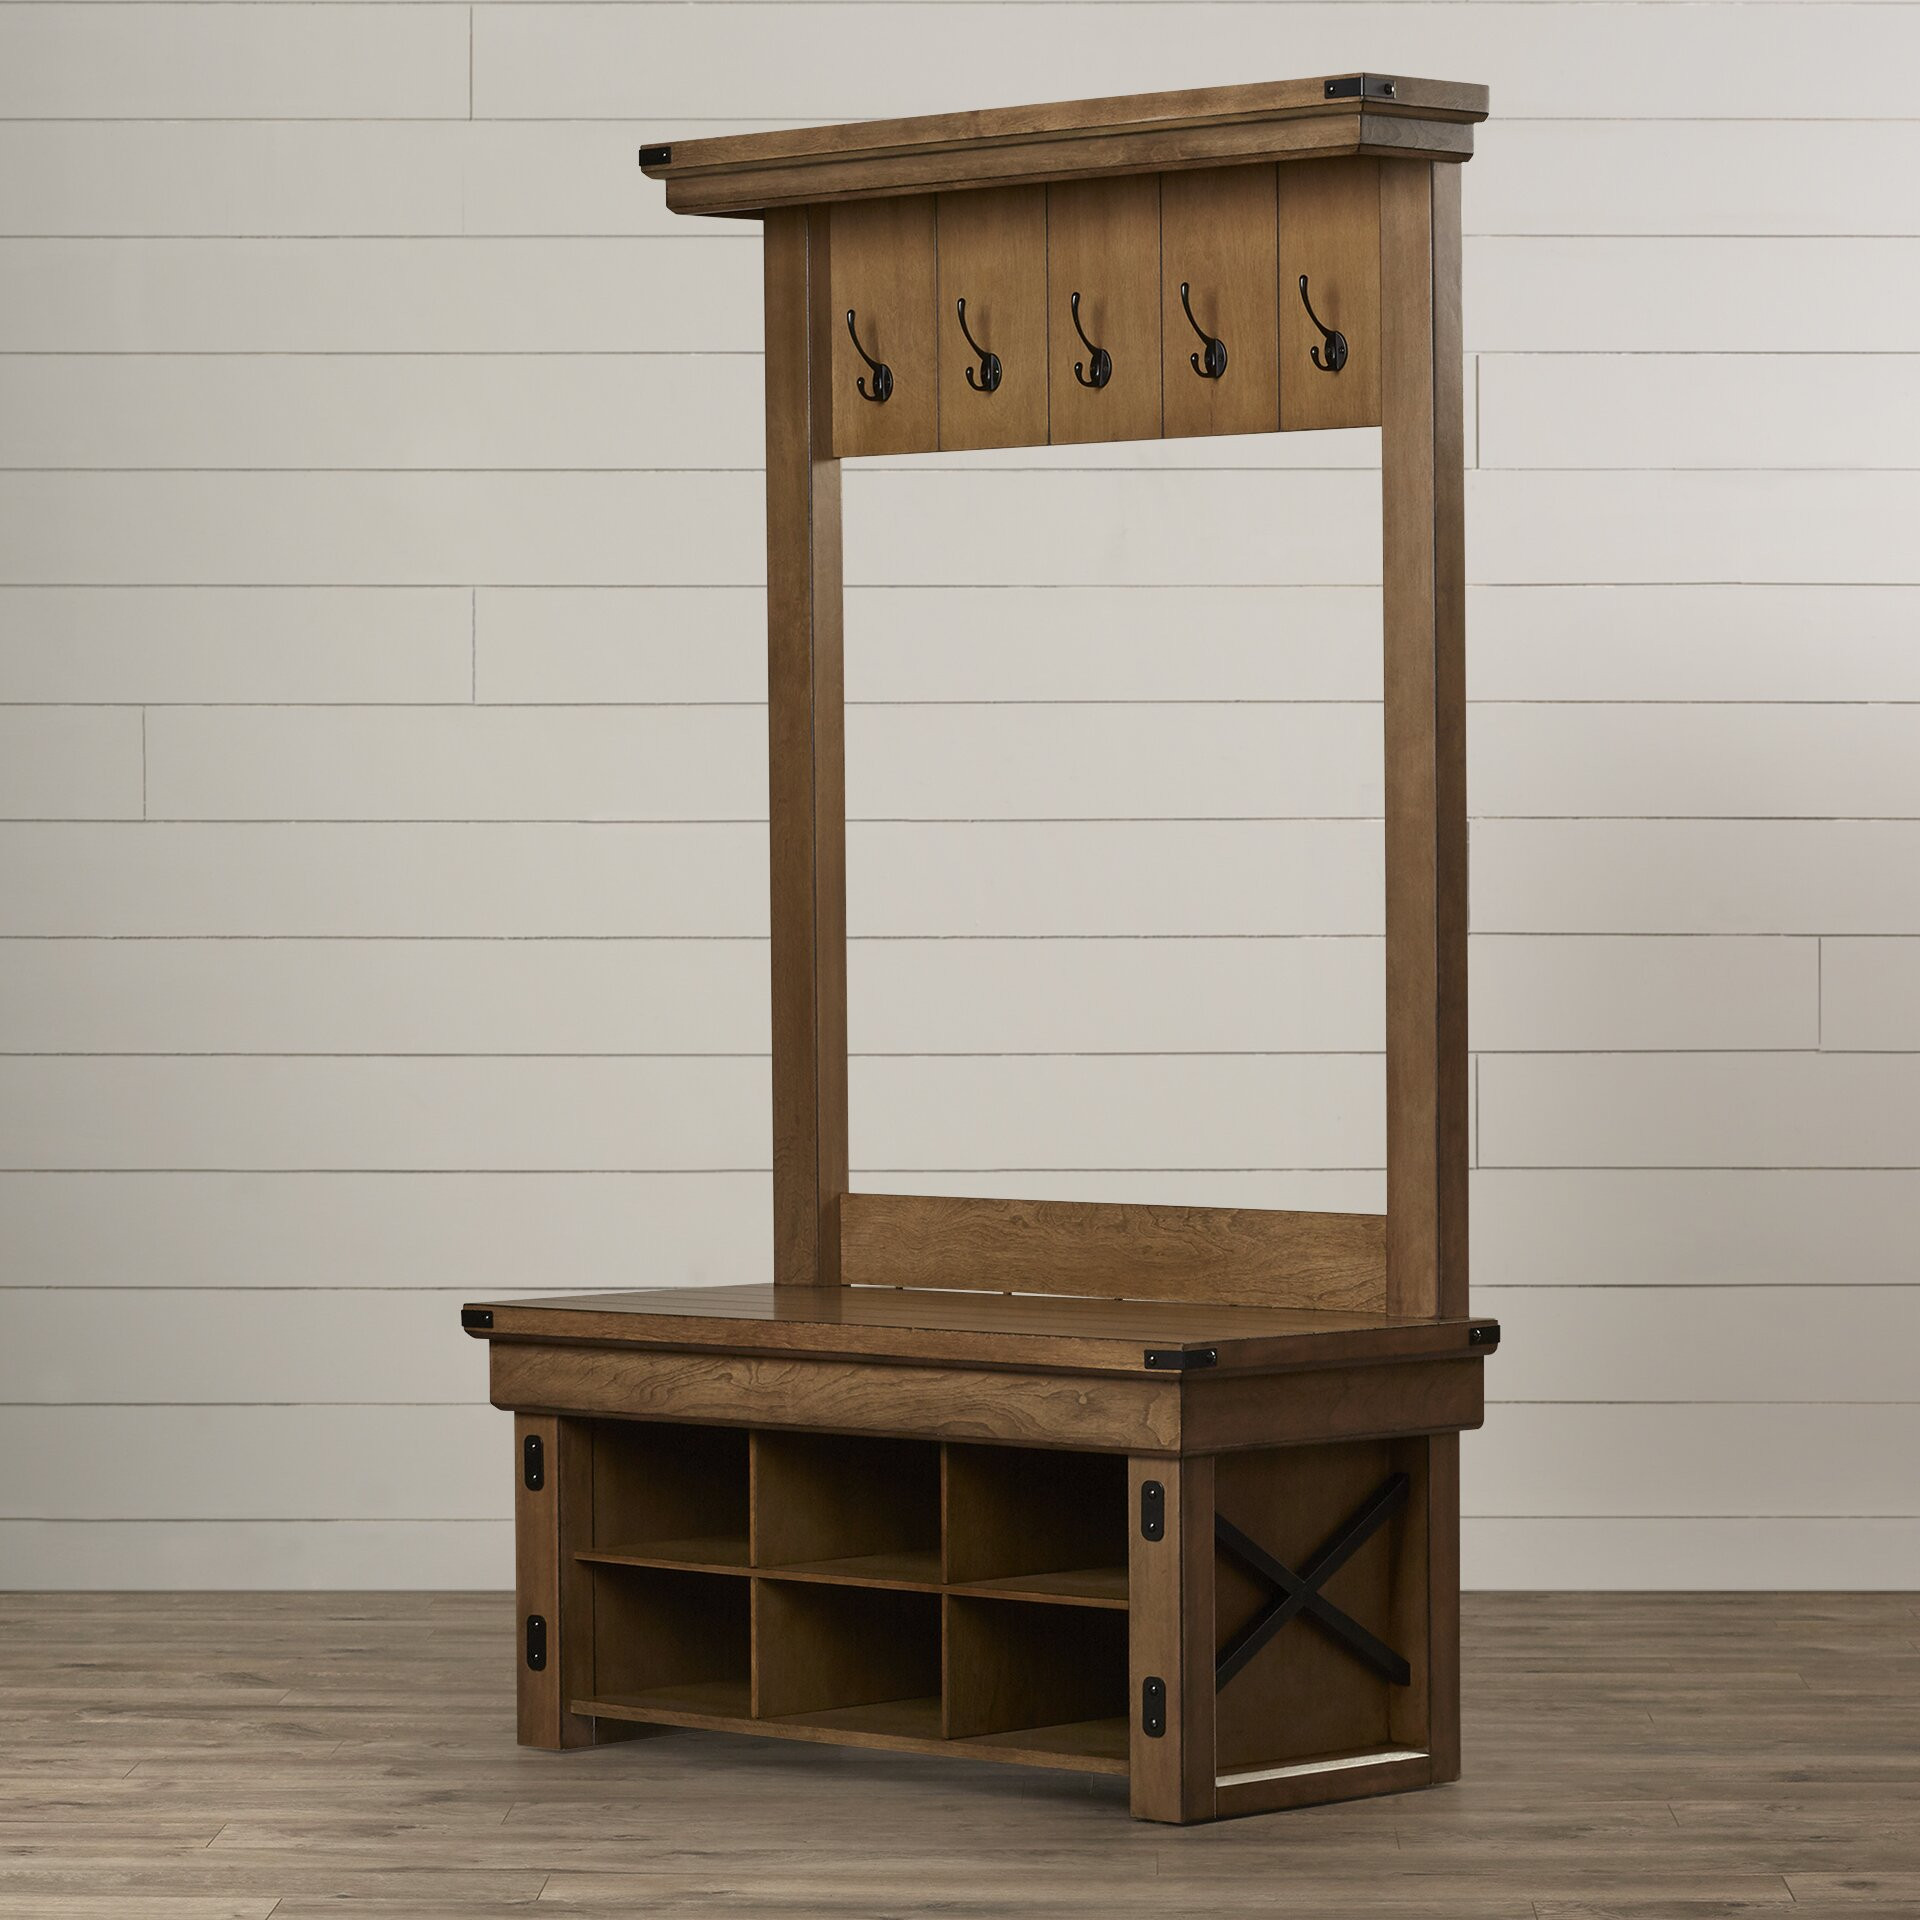 Hall Tree With Storage Bench
 August Grove Andora Wood Veneer Entryway Hall Tree with